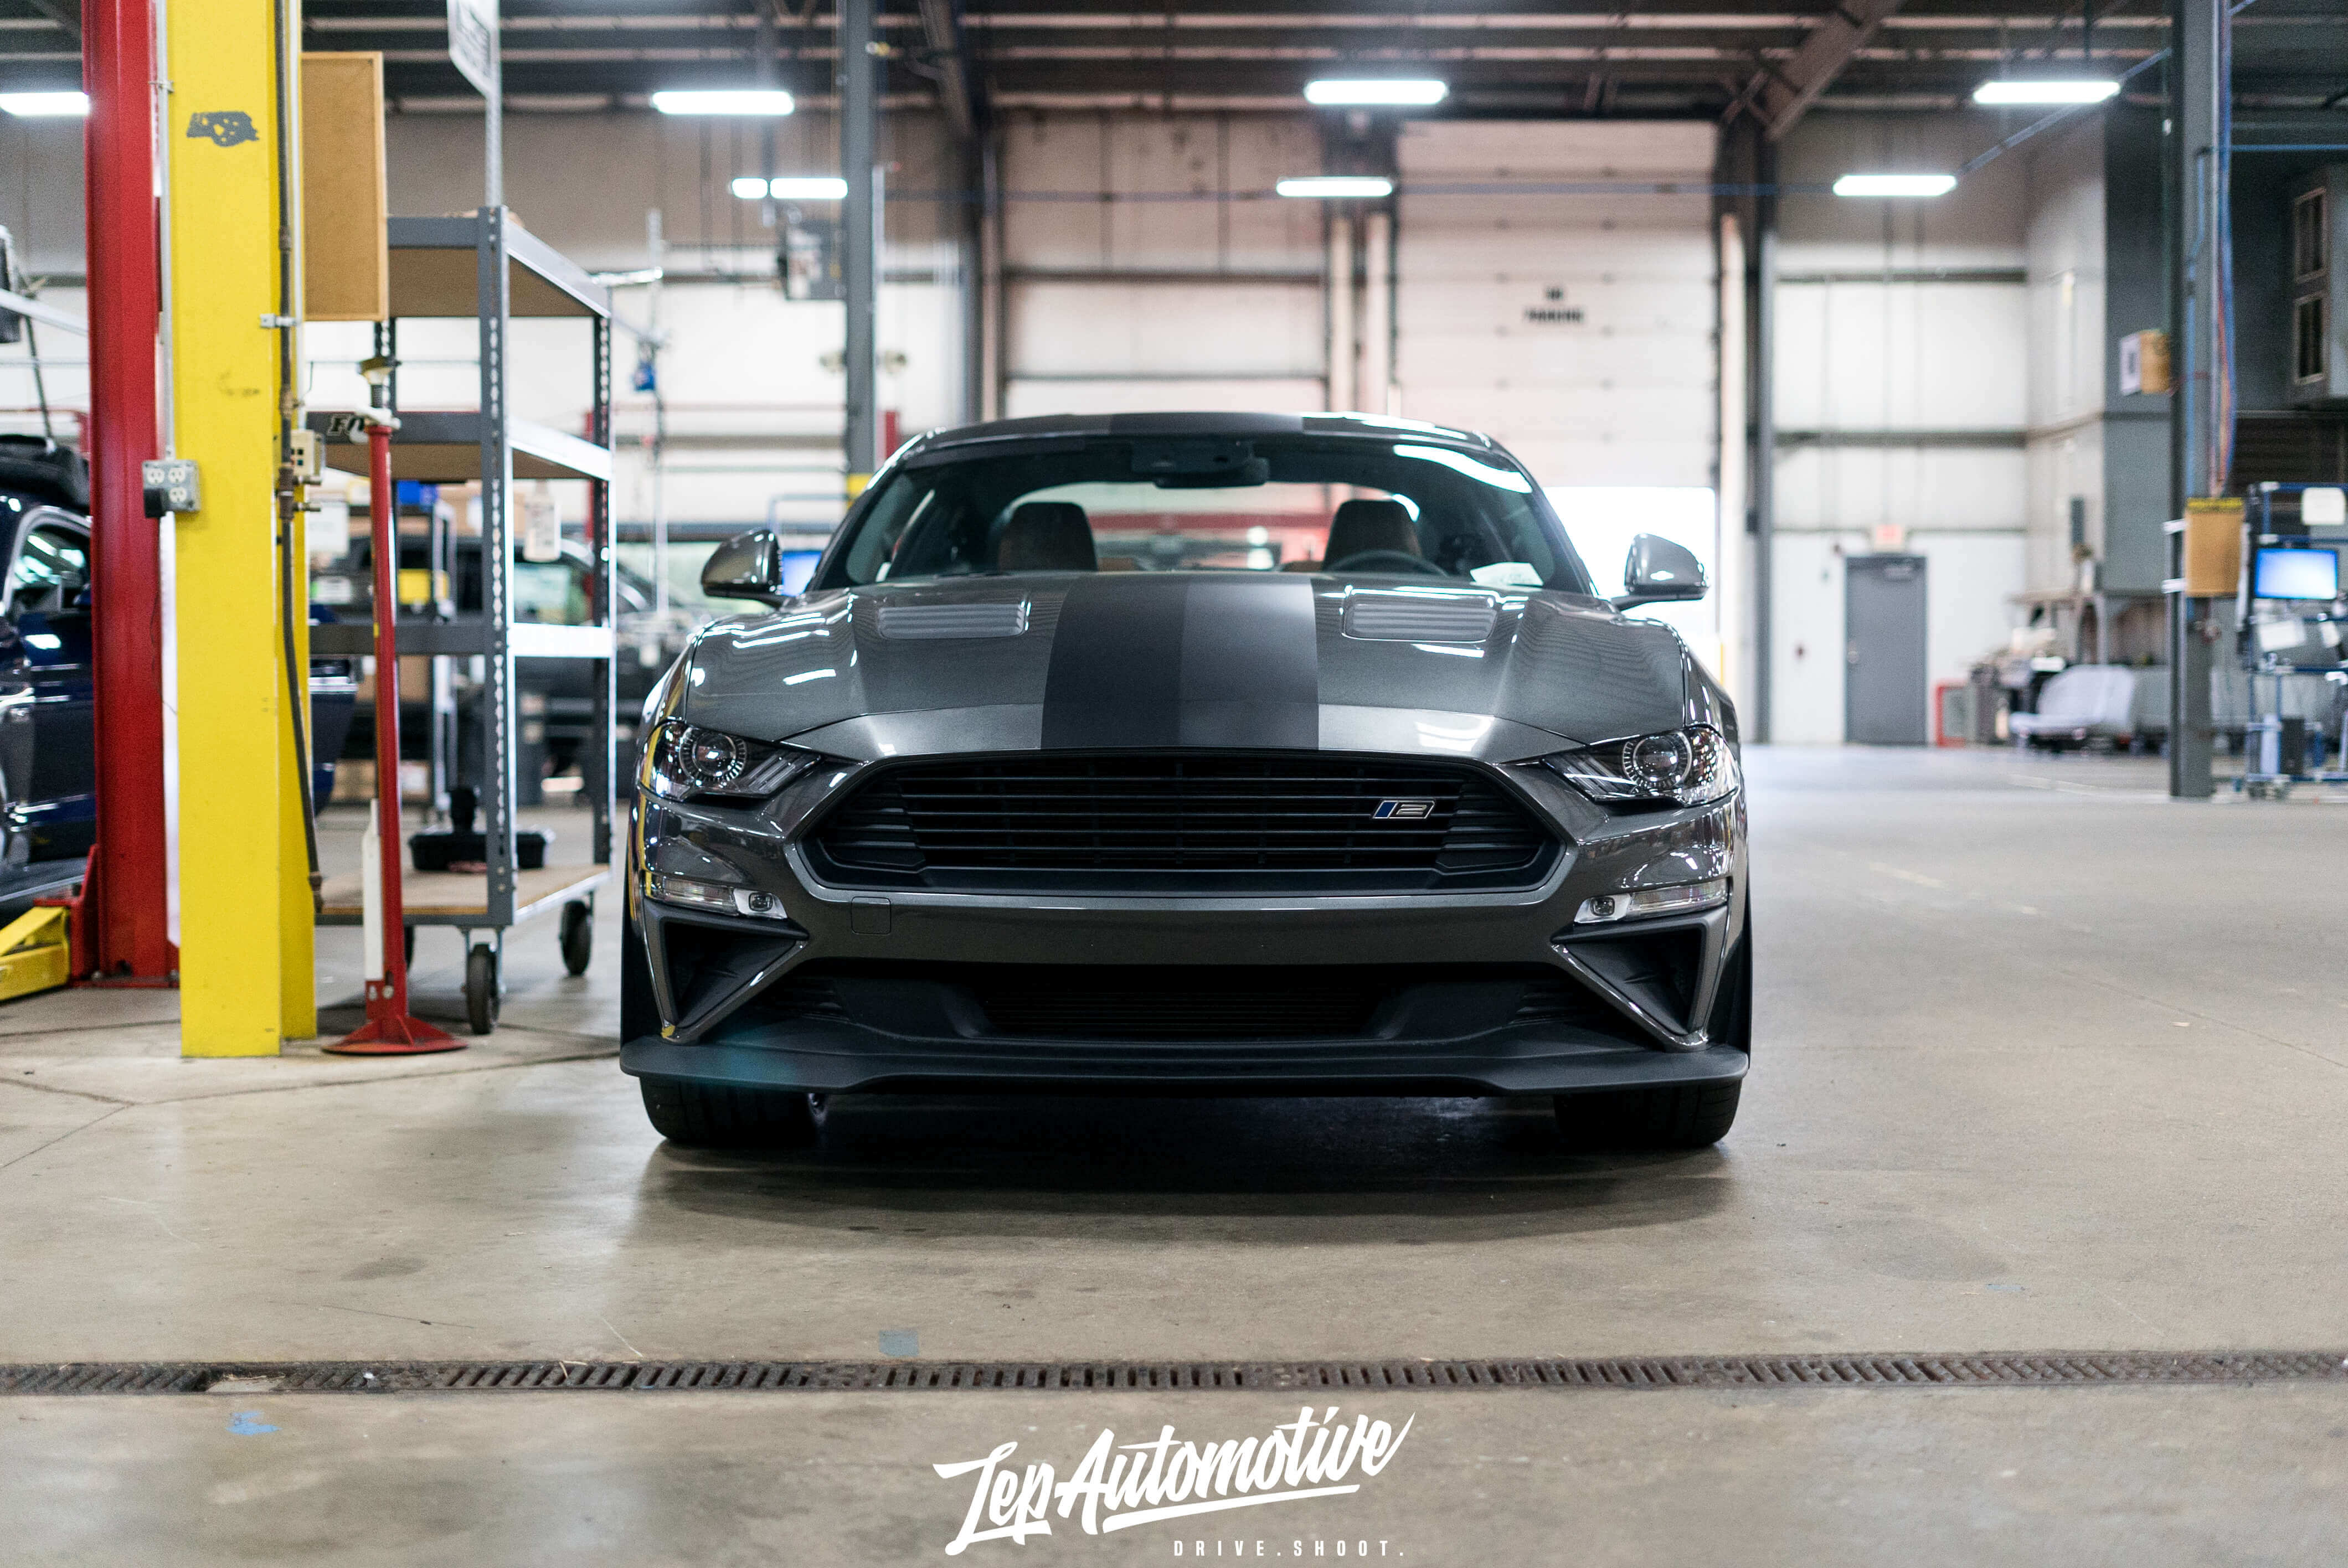 This is what ROUSH can do for your ’18+ Mustang